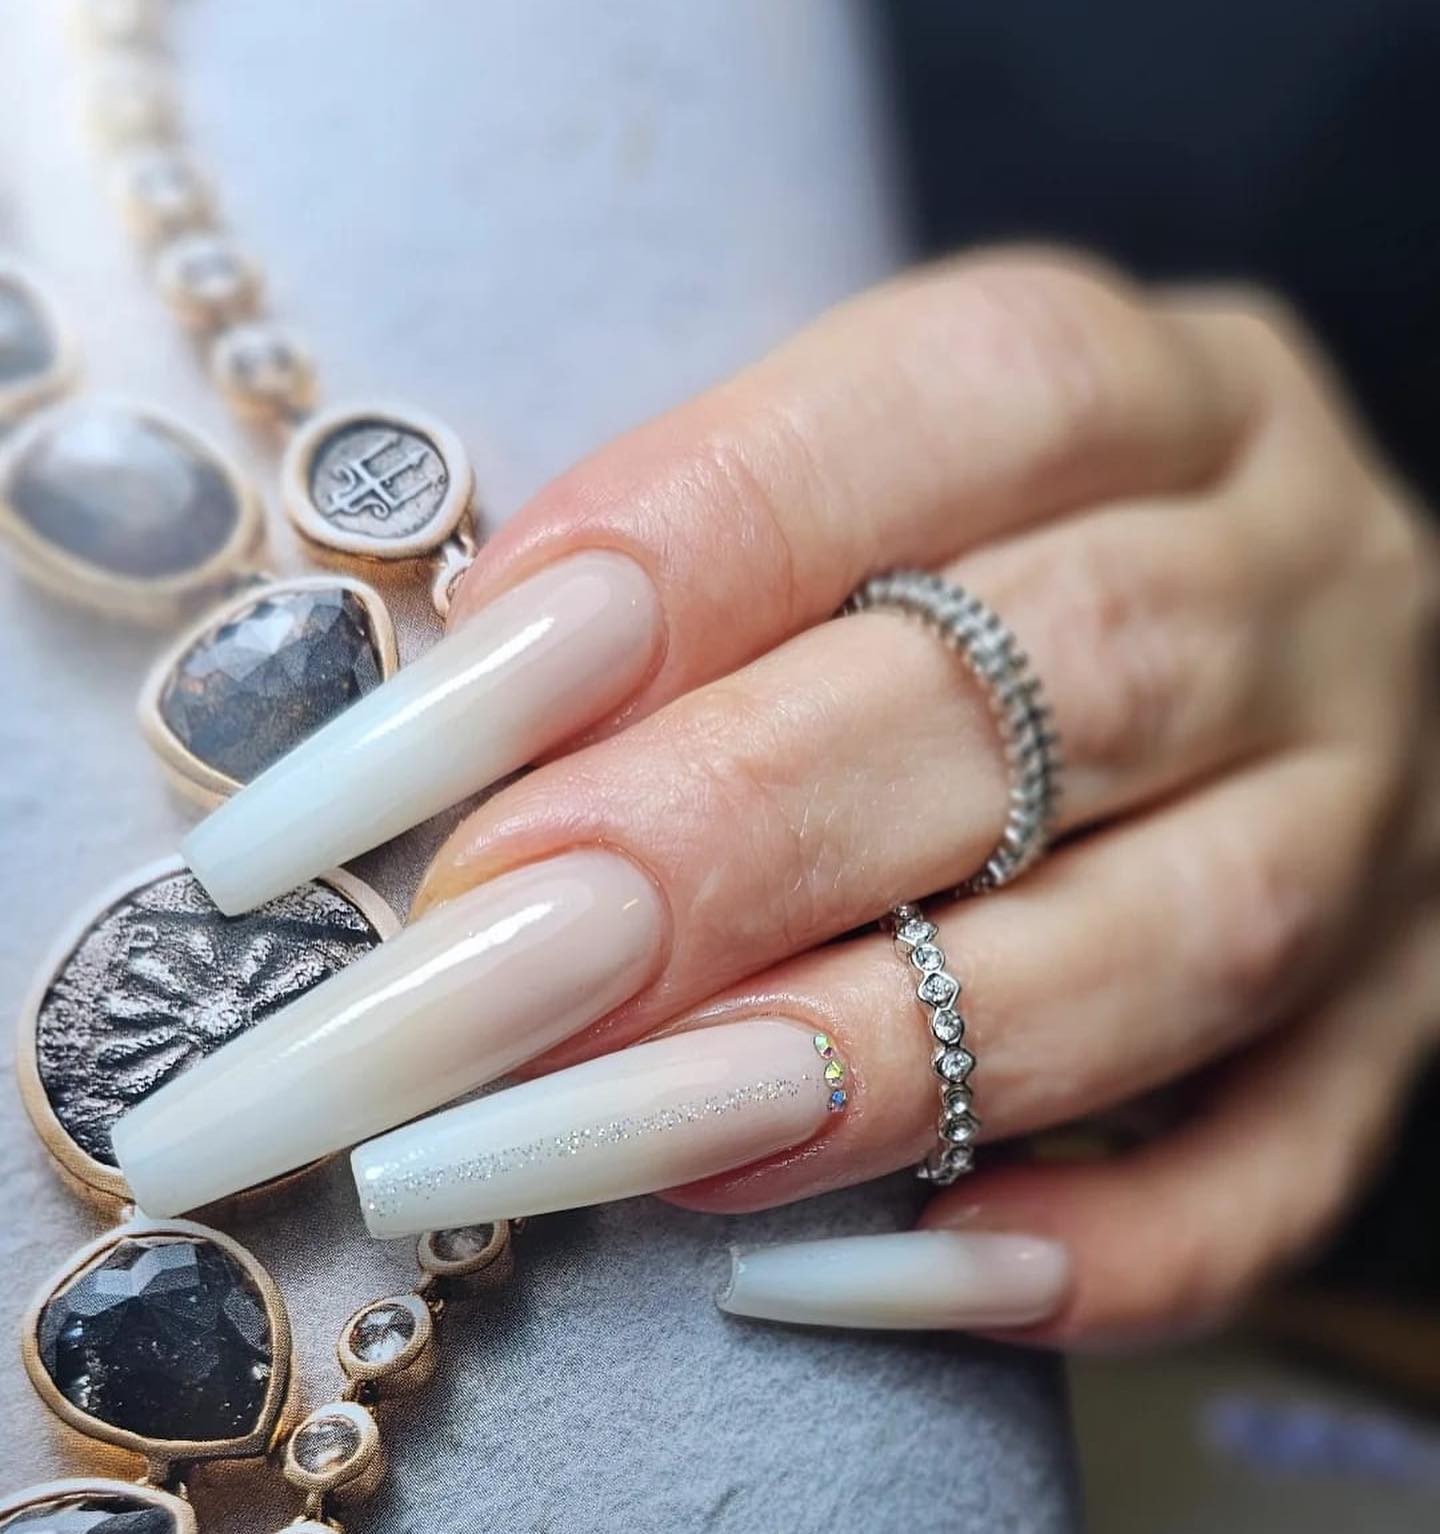 Pointy Bad Gal: 15+ Baddest Nail Designs with Ballerina Tip